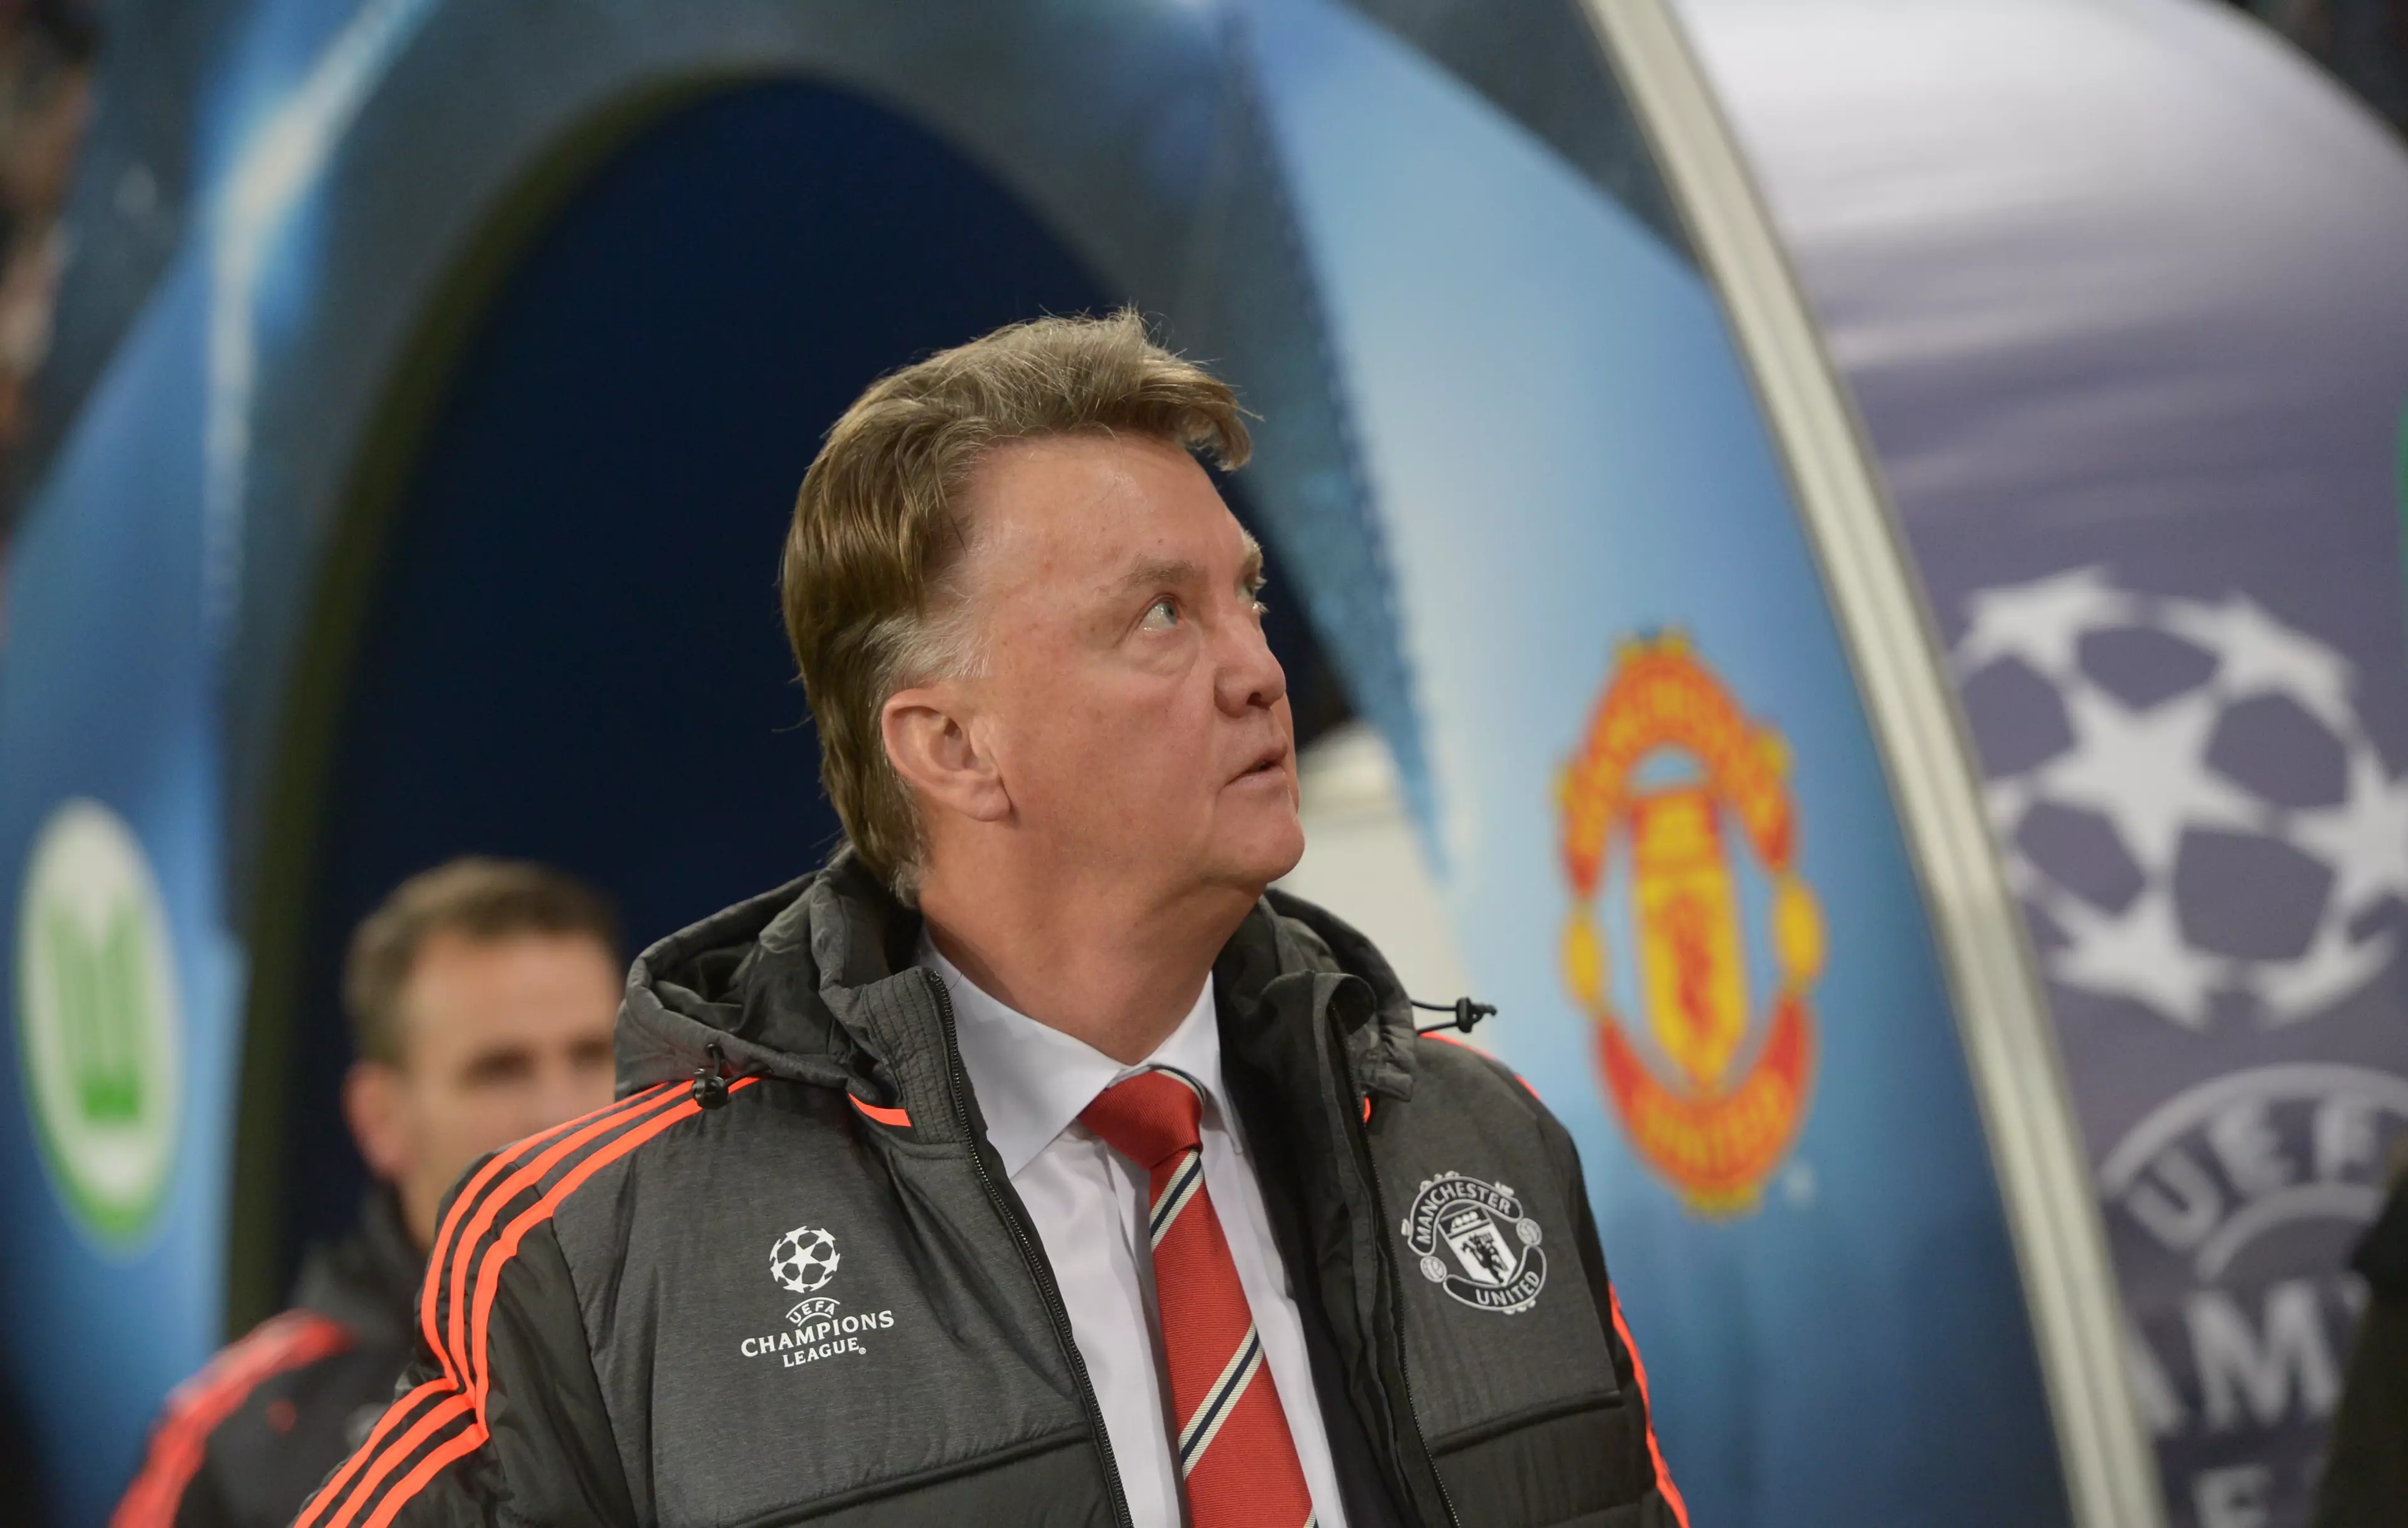 Van Gaal's loss at Wolfsburg seemed certain end his reign but it didn't. Image: PA Images